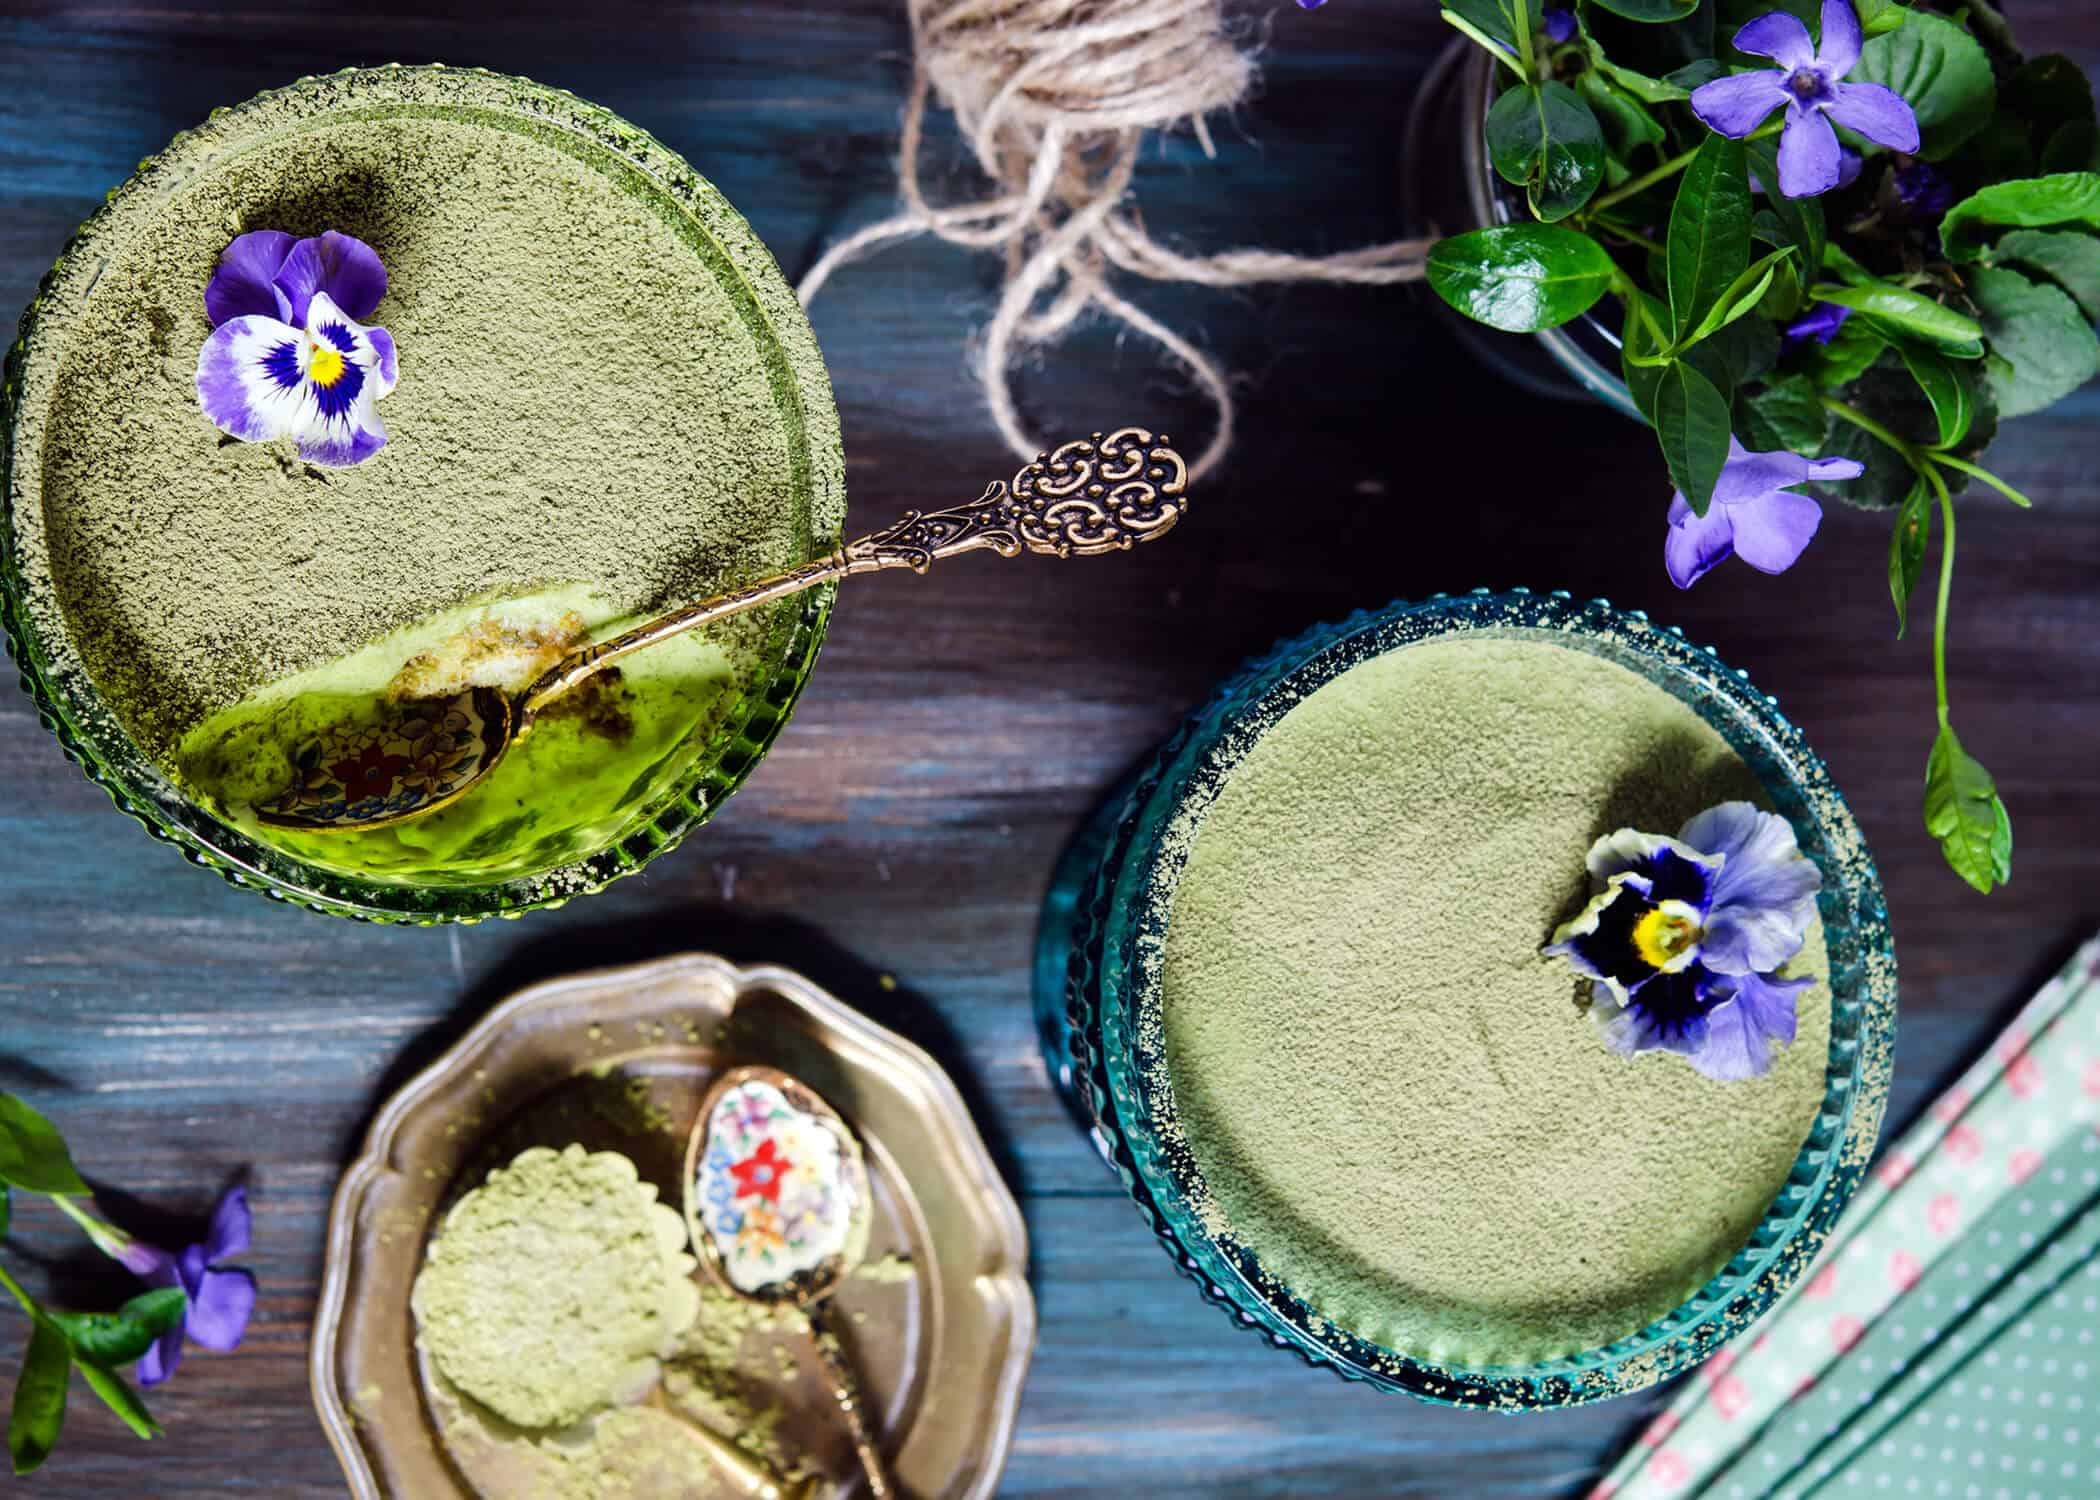 matcha dessert recipes on a table with pansies